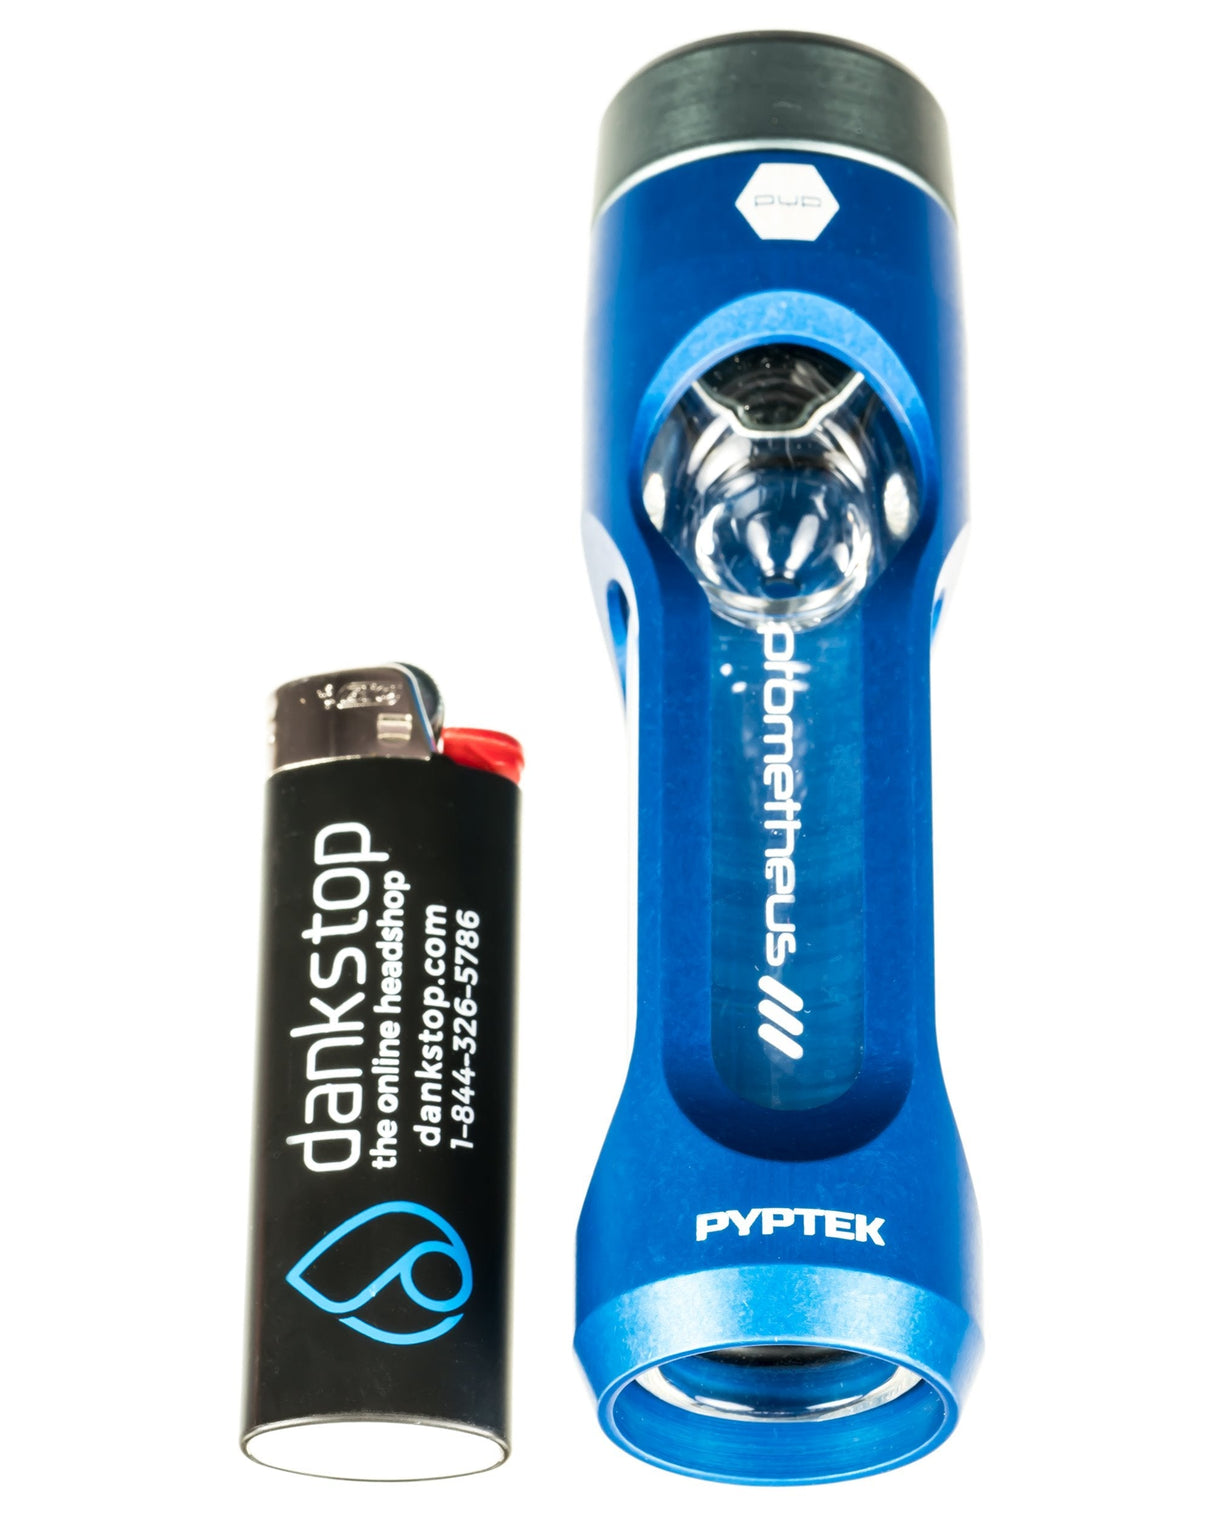 Pyptek Prometheus Dreamroller Pipe in blue with heavy wall glass, side view next to lighter